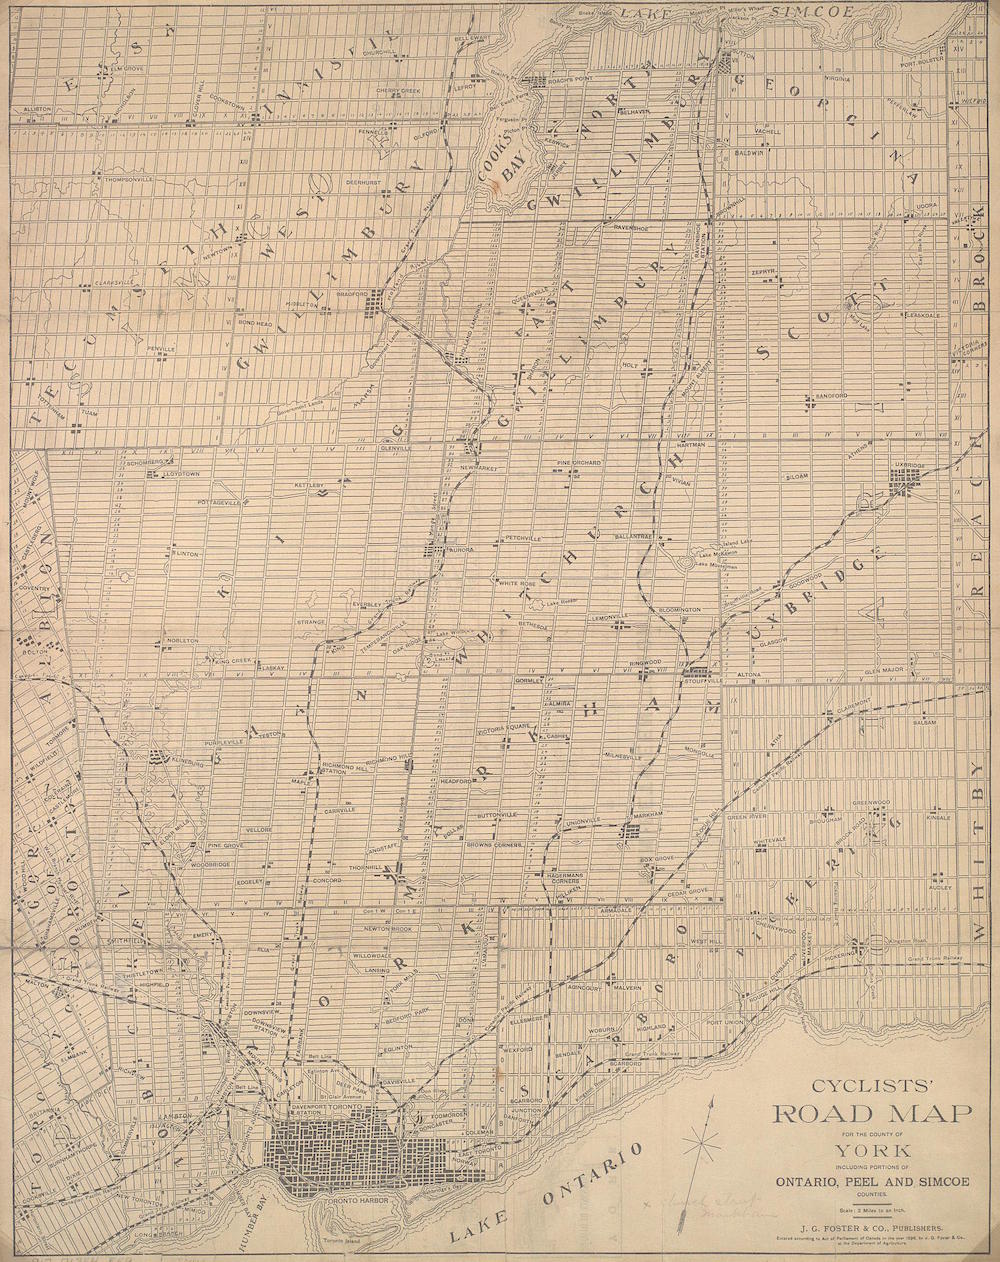 1898 - Cyclists' Road Map for the County of York Including Portions of Ontario, Peel and Simcoe, 1898